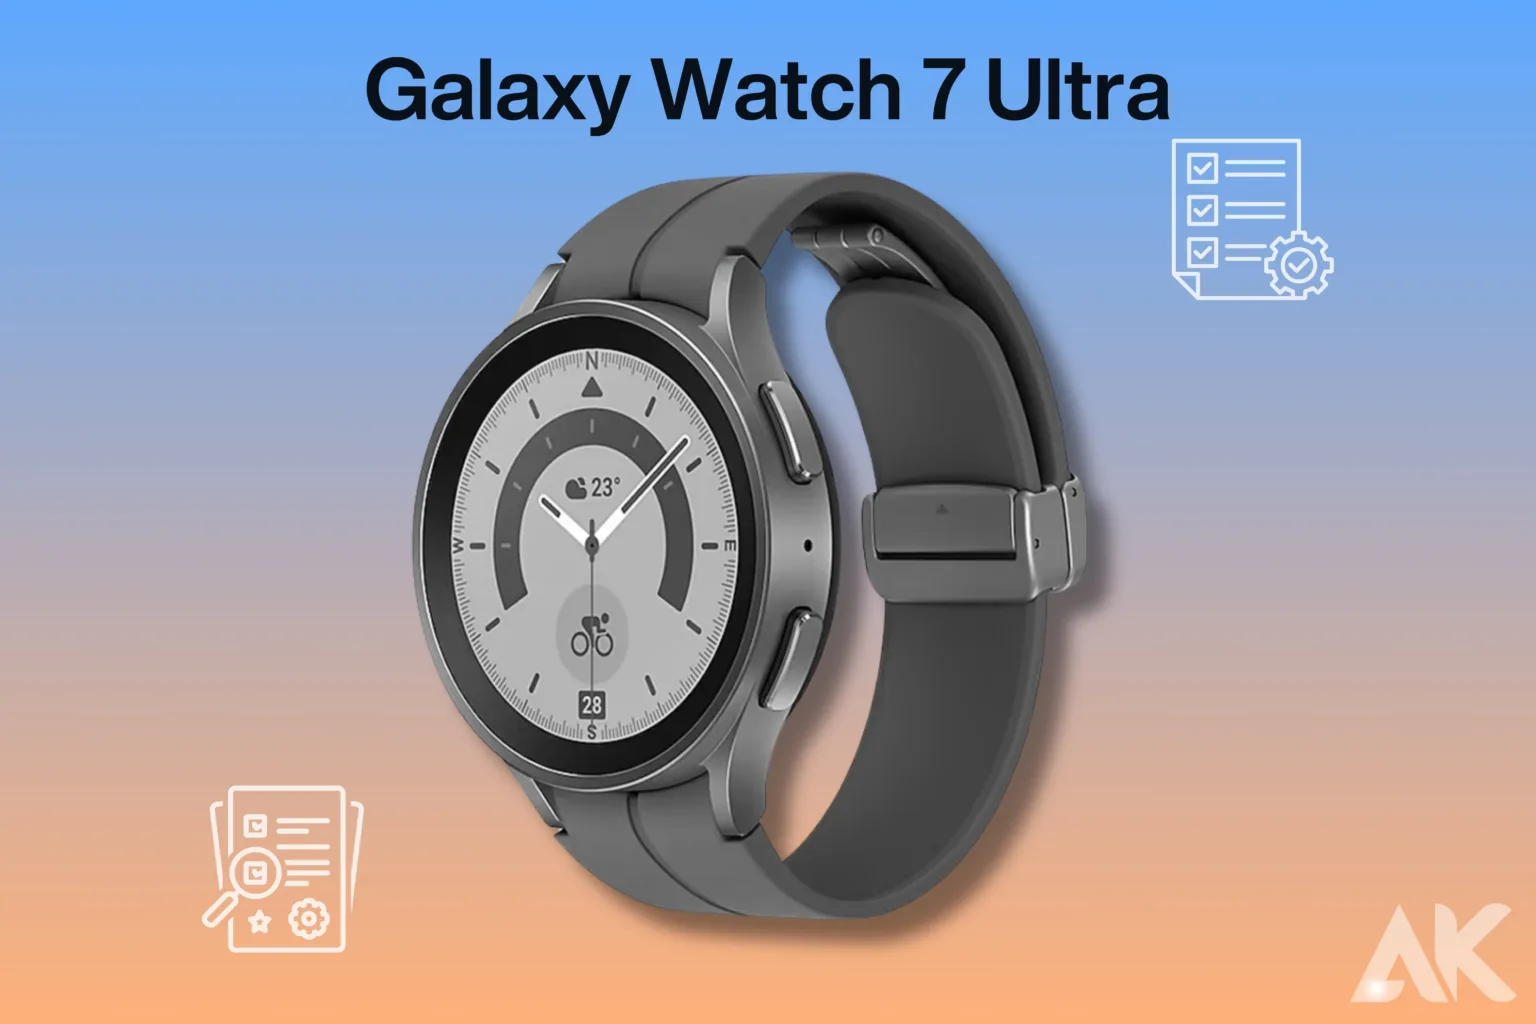 Complete Galaxy Watch 7 Ultra Specifications What’s Inside